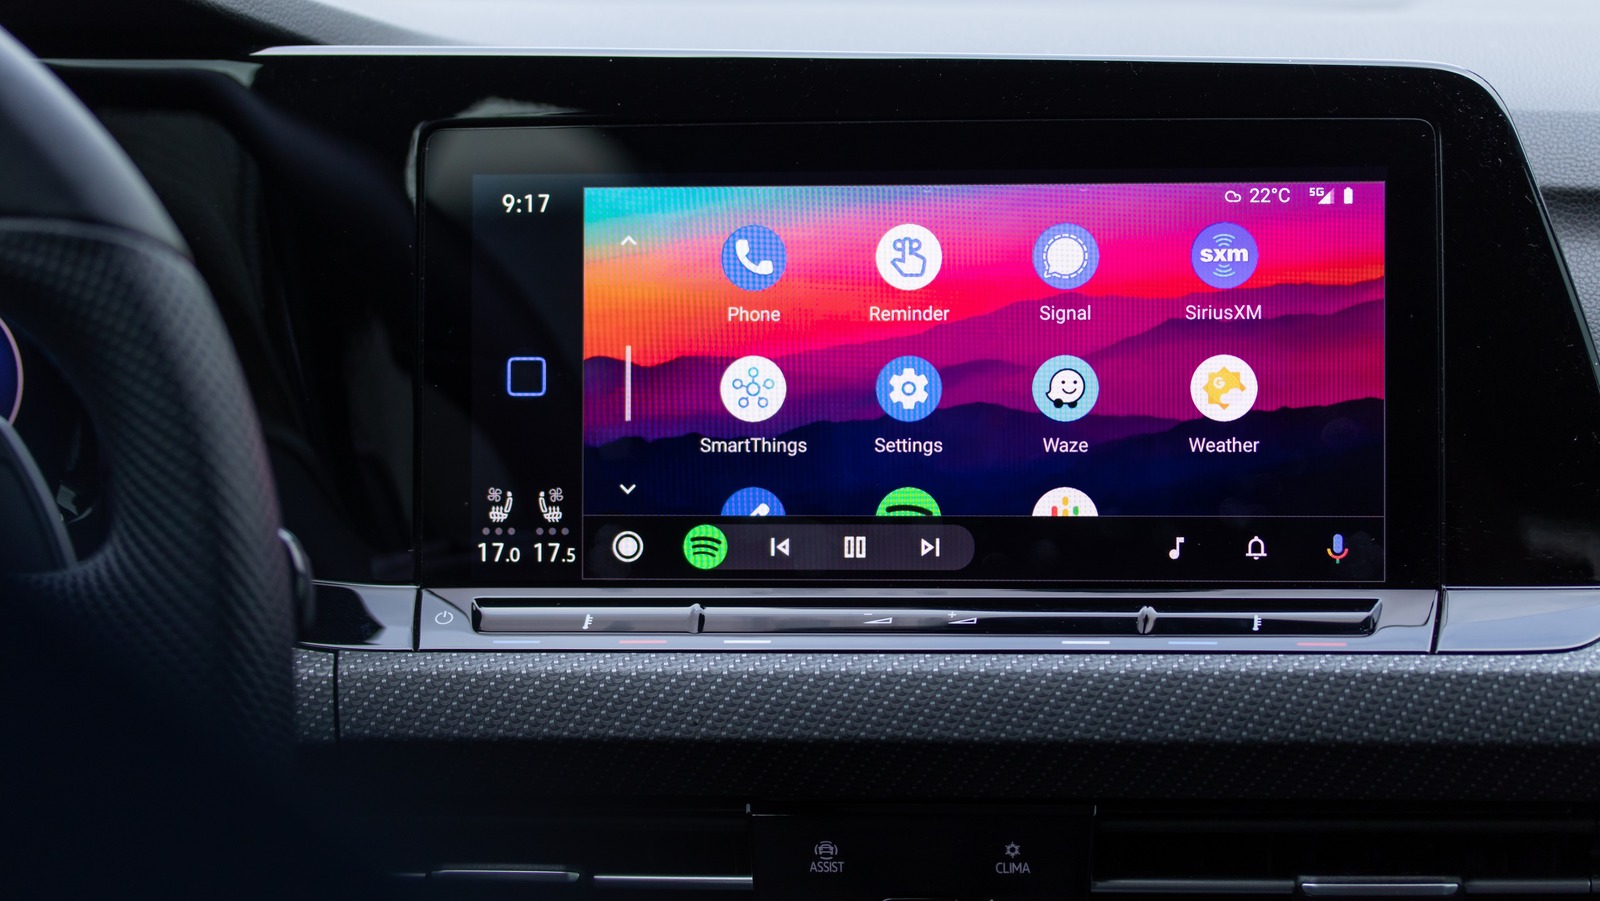 What You Need To Use Android Auto, And How To Get Started